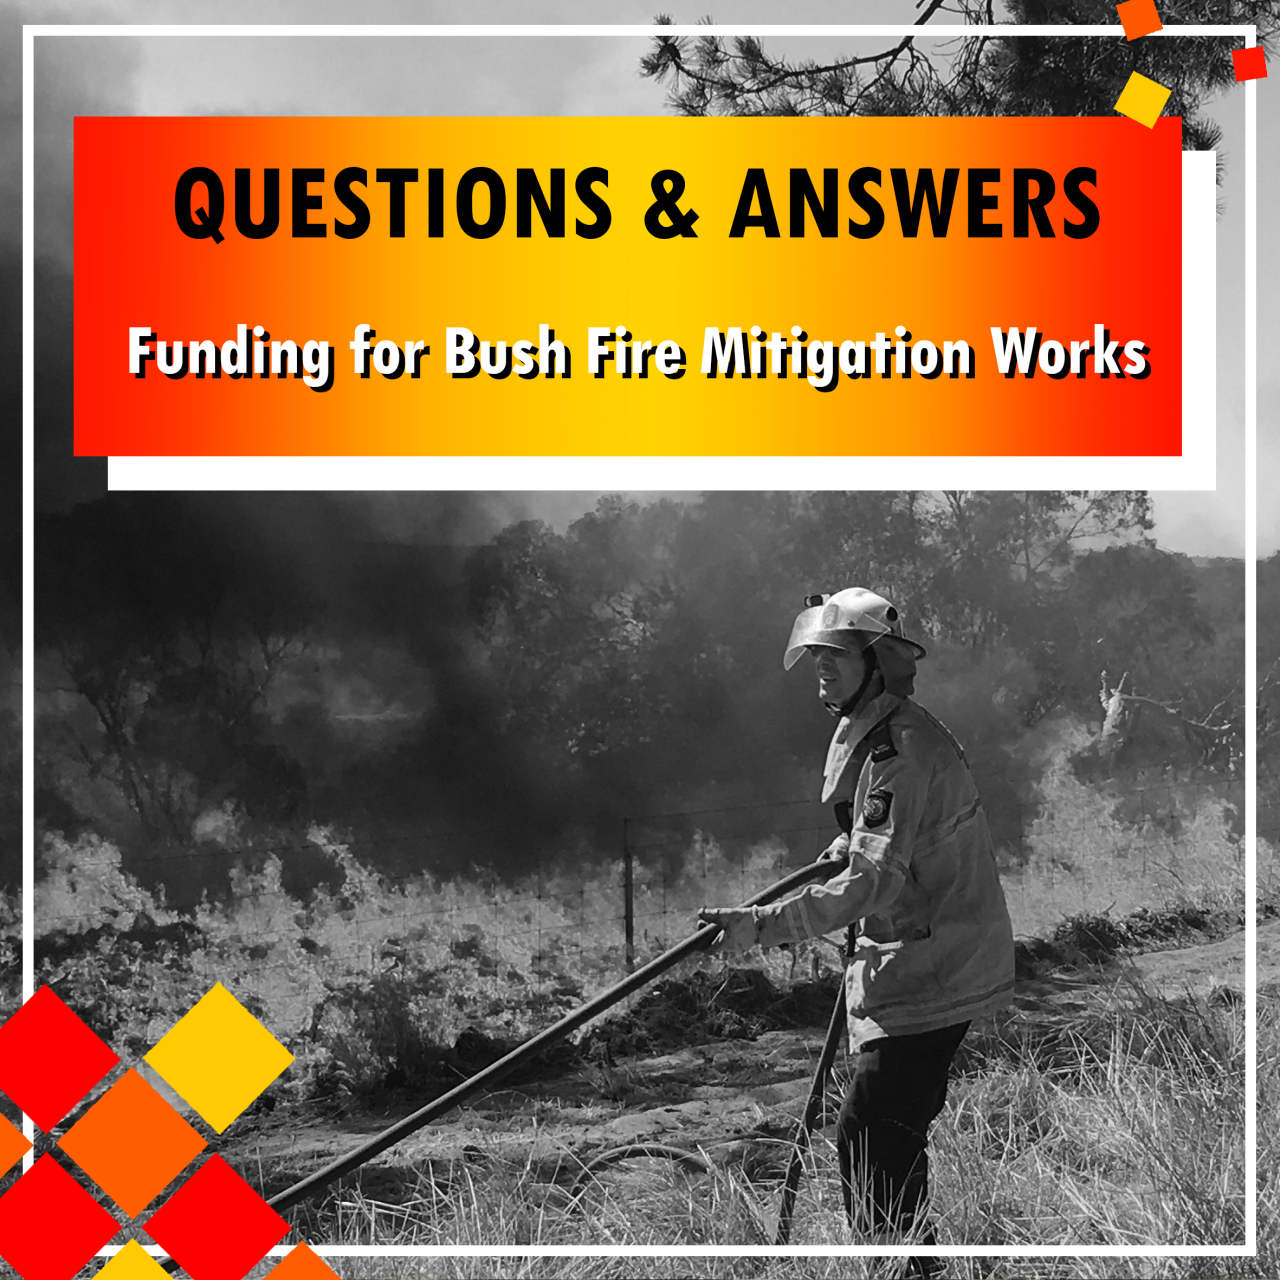 Q & A - Funding for Bush Fire Mitigation Works 🔥